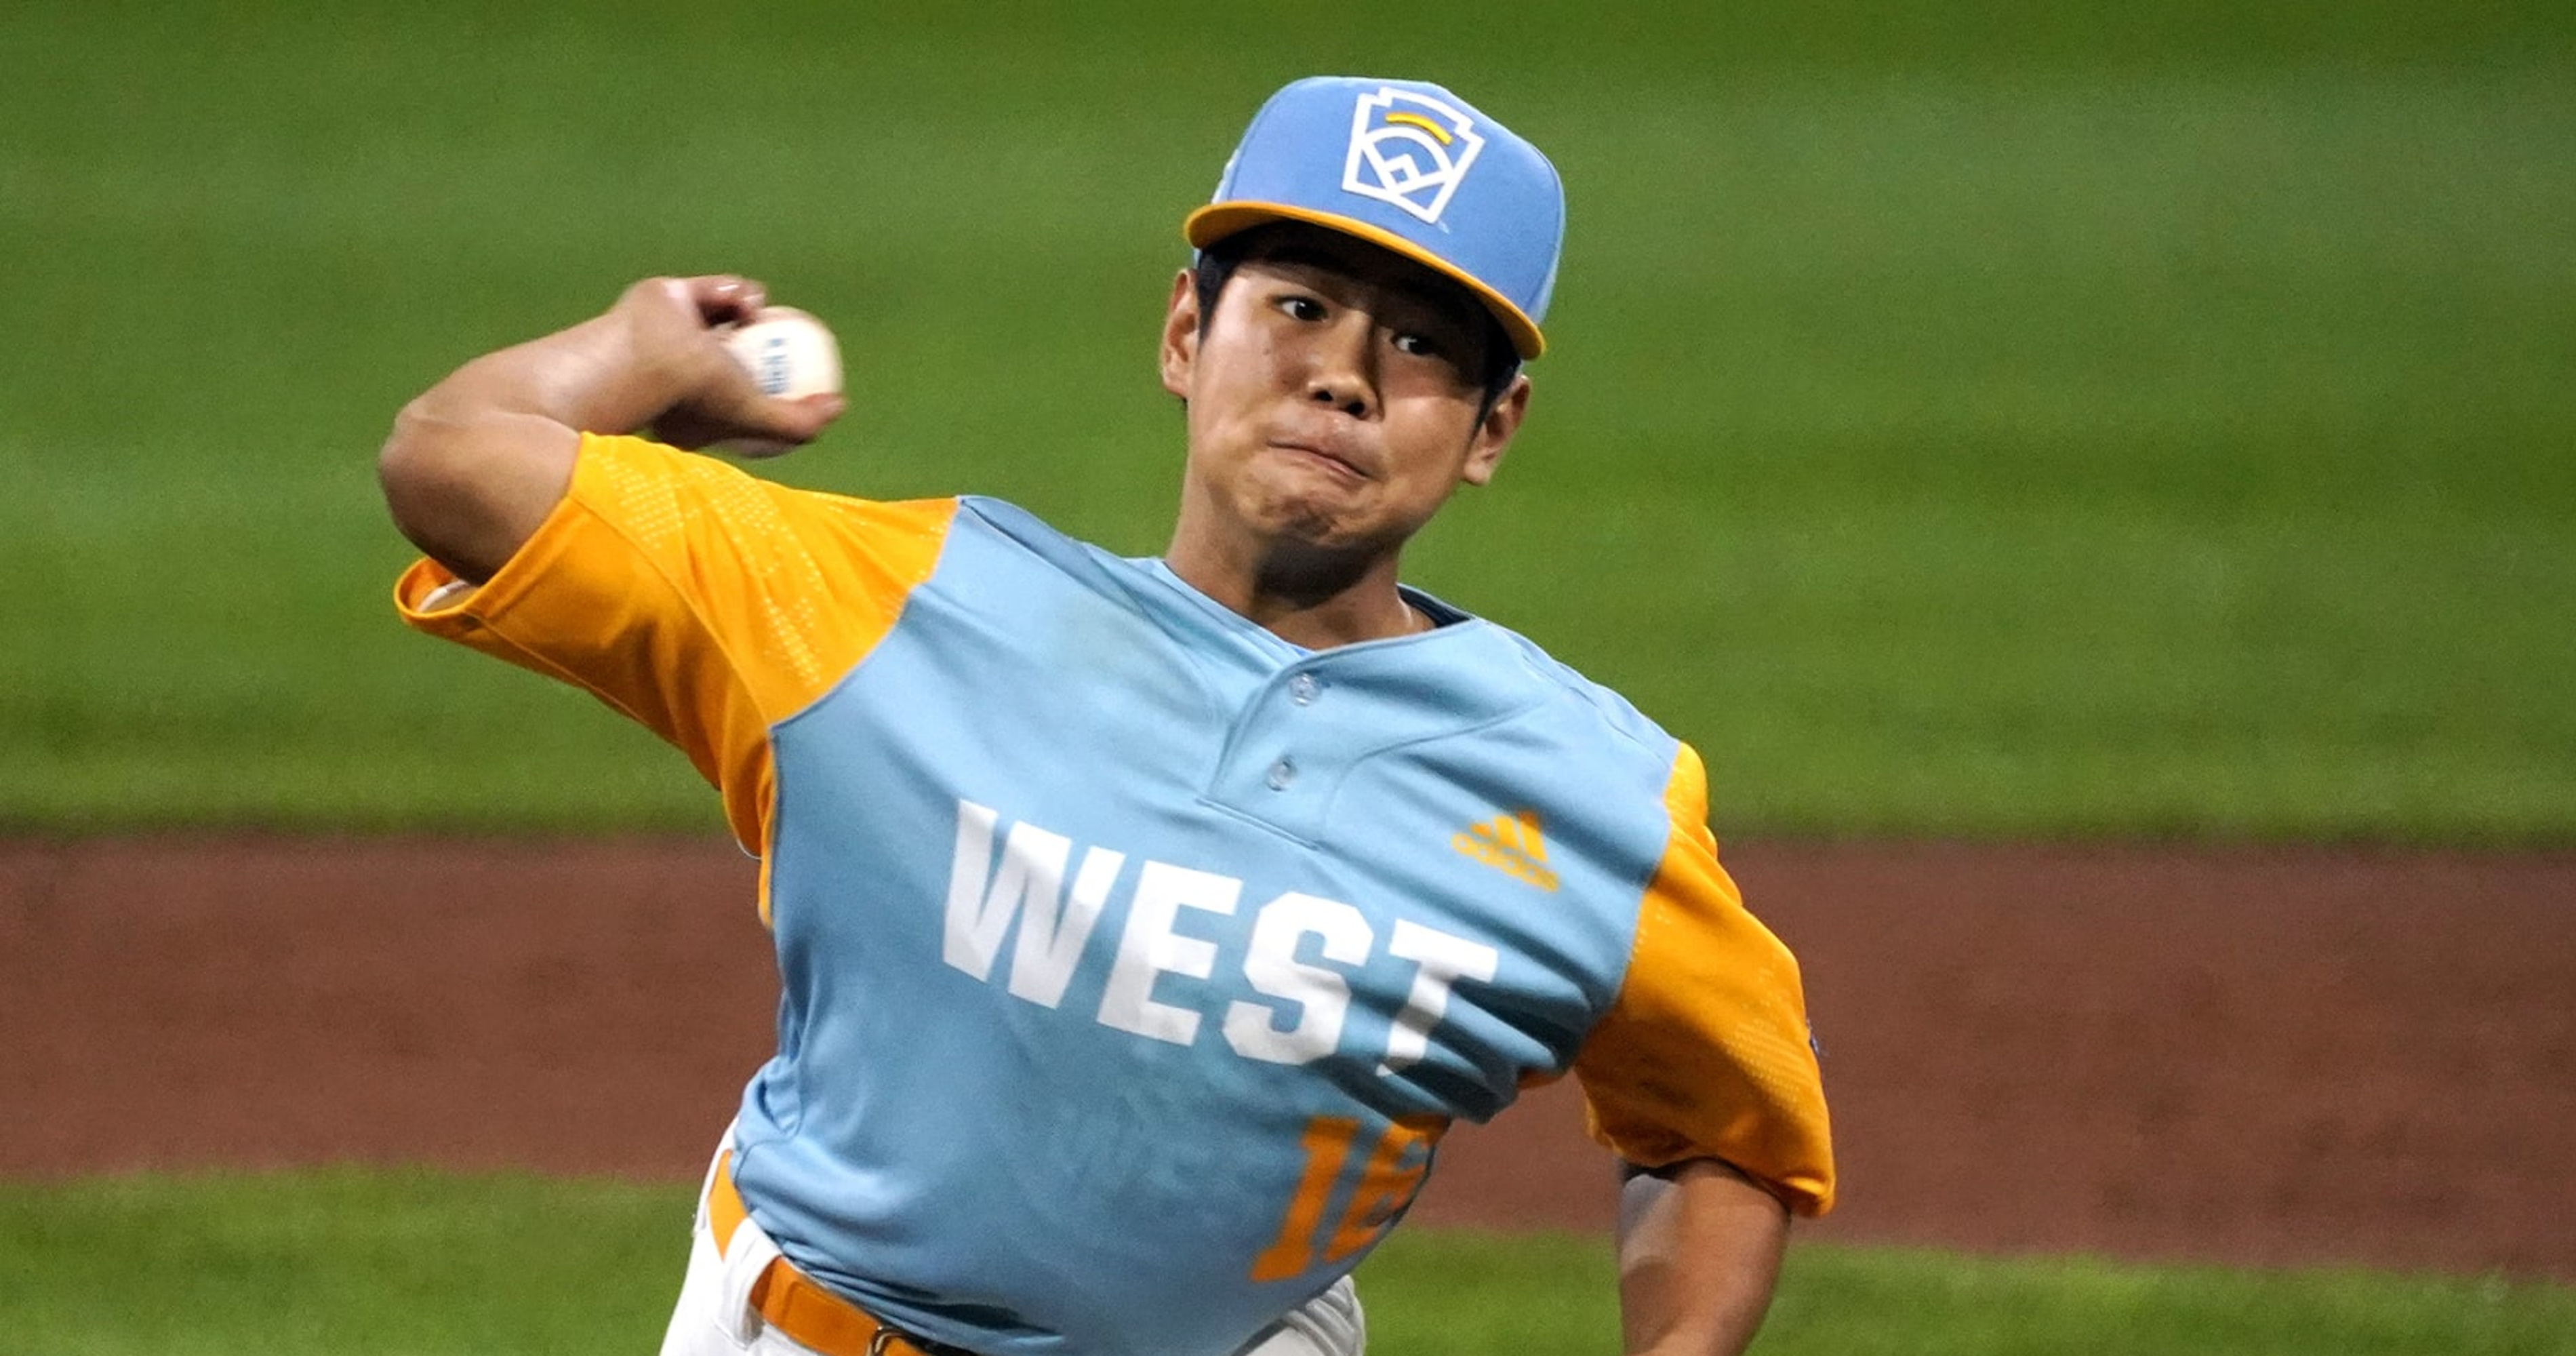 Little League World Series 2022: Friday Schedule, TV Info and